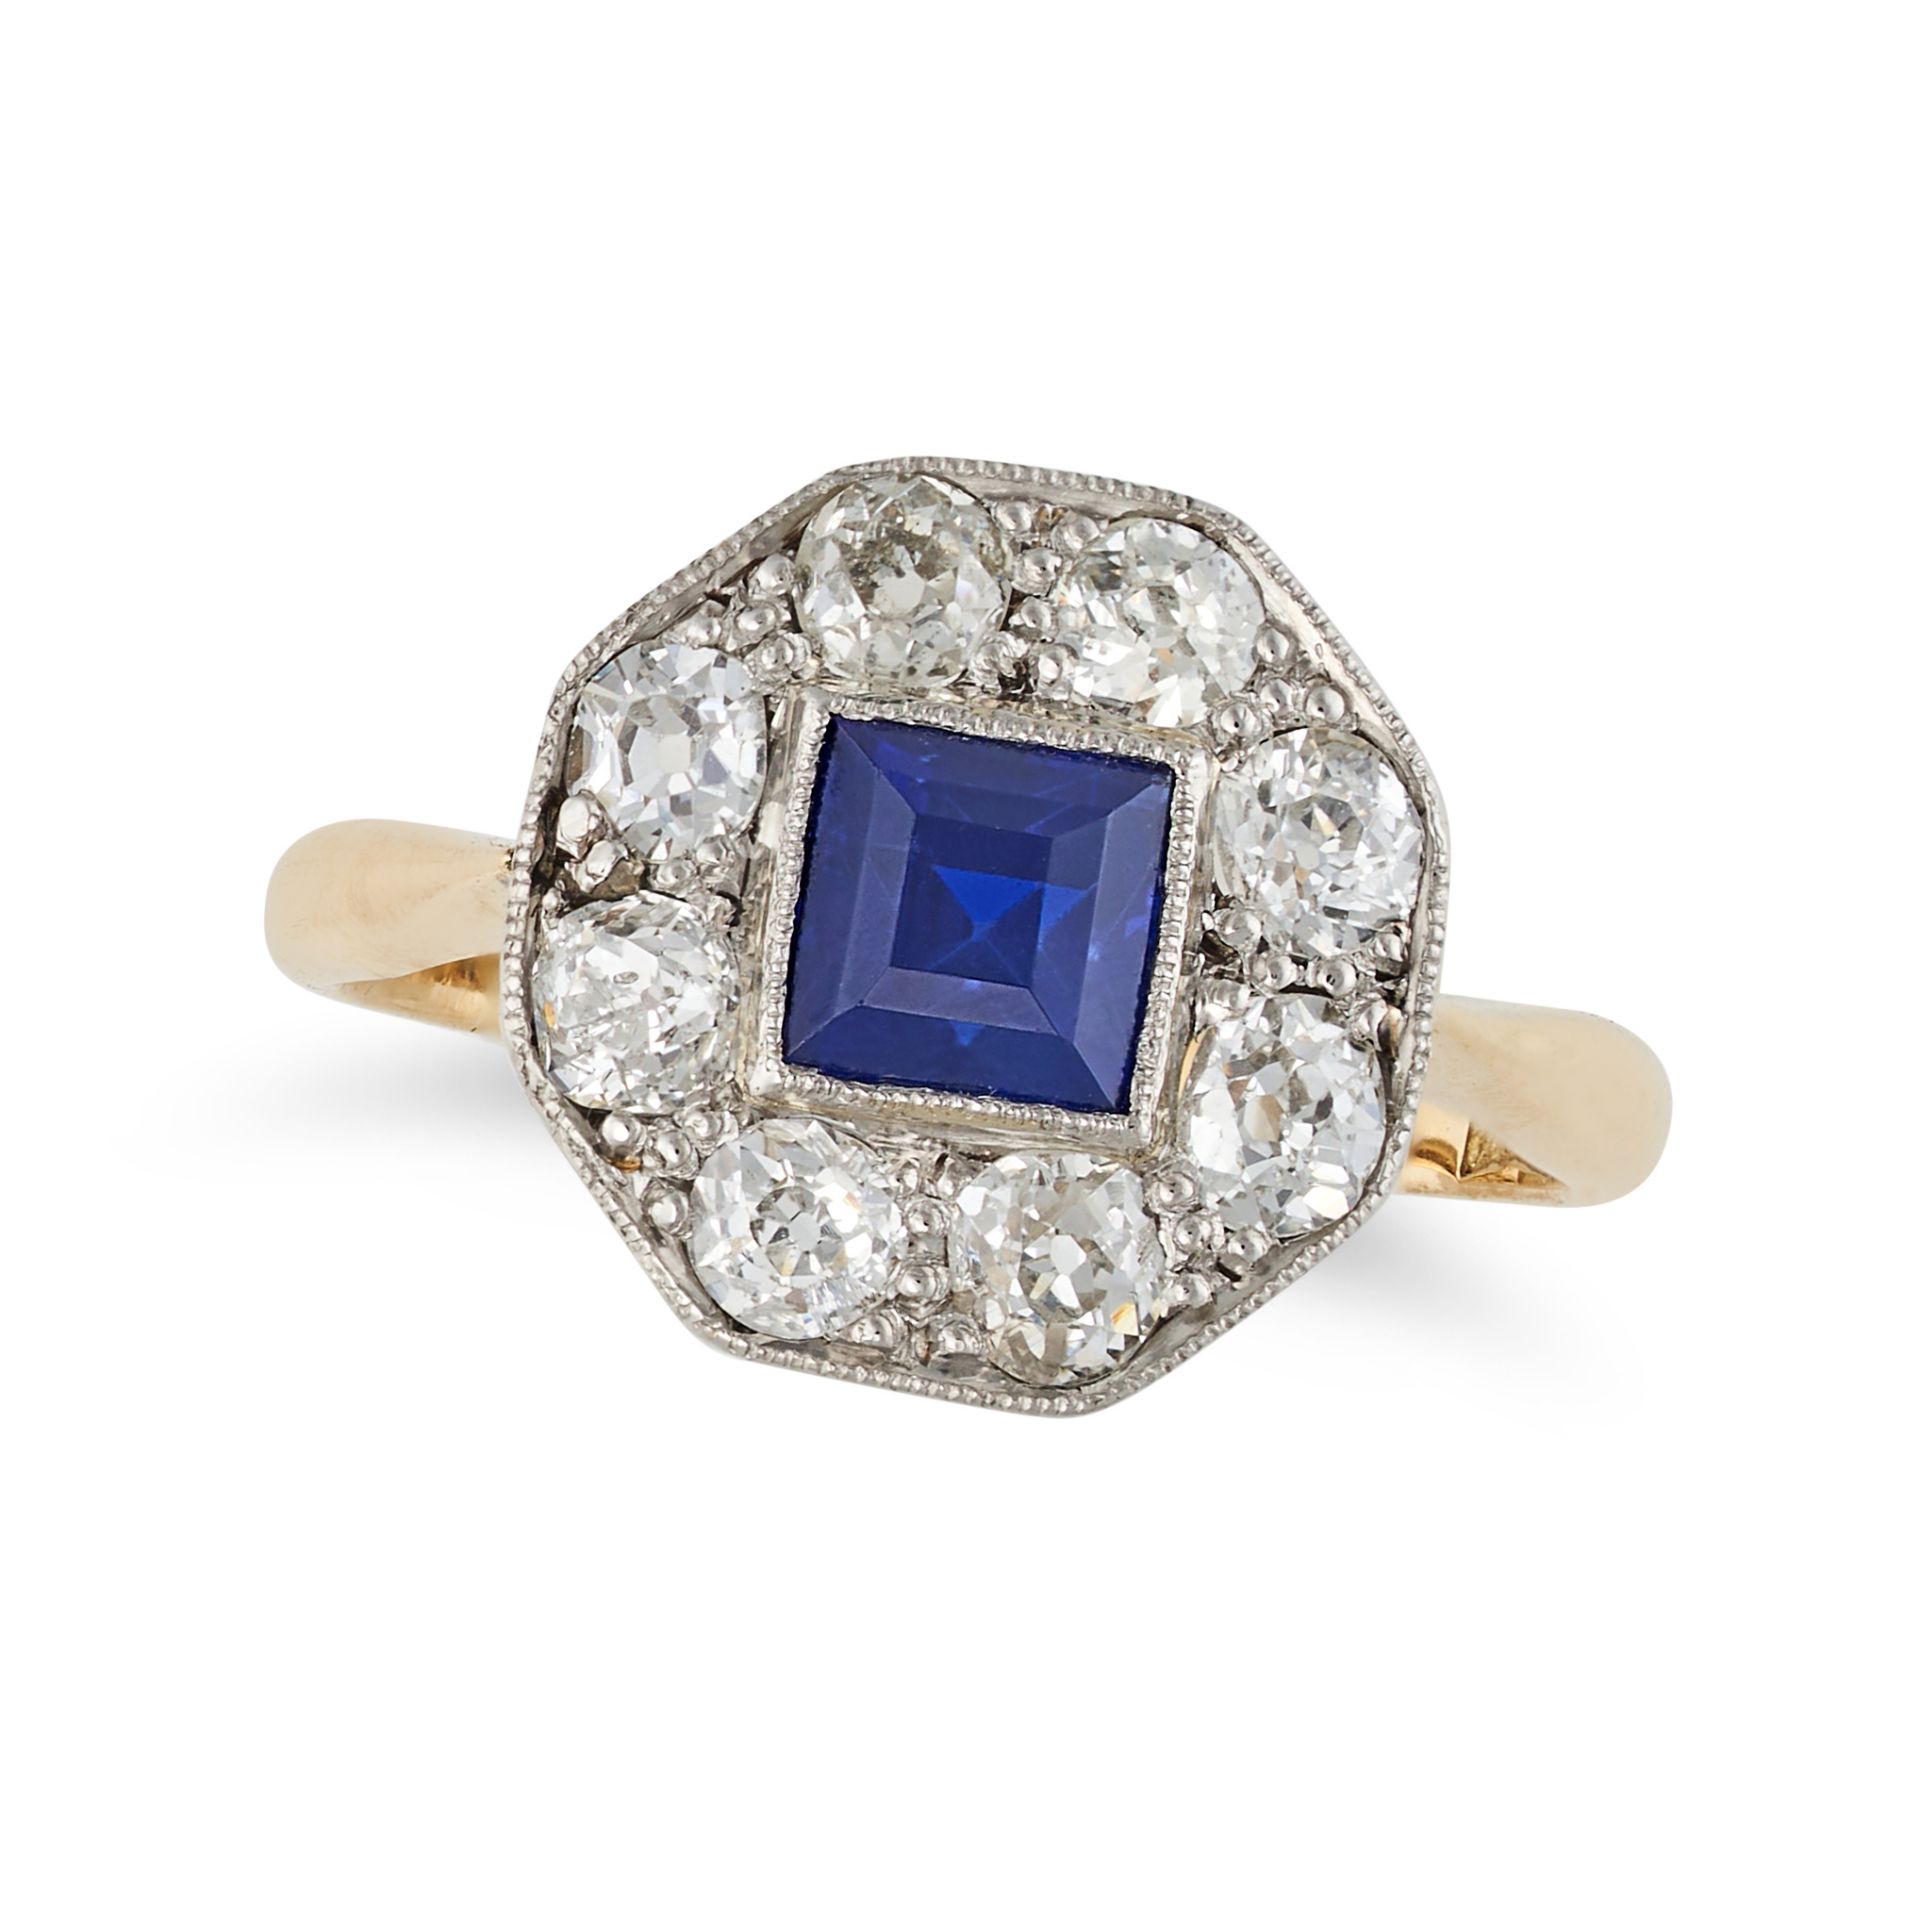 A SAPPHIRE AND DIAMOND CLUSTER RING in 18ct yellow gold and platinum, set with a square step cut ...